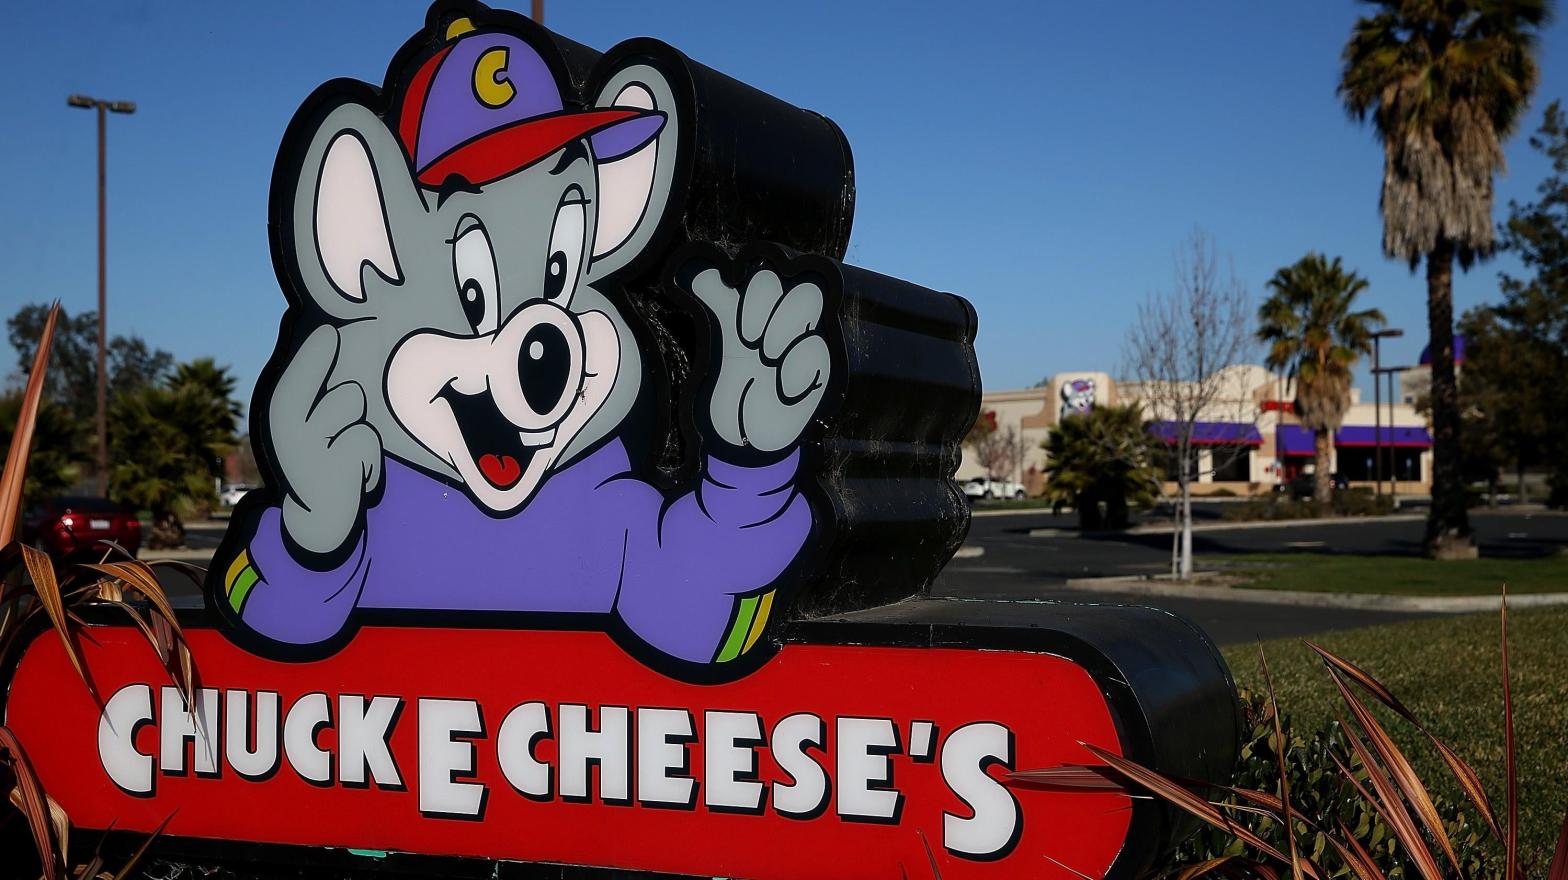 Chuck E. Cheese announced in 2017 that it would be moving away from animatronic shows, in favour of video-based entertainment.  (Image: Justin Sullivan, Getty Images)